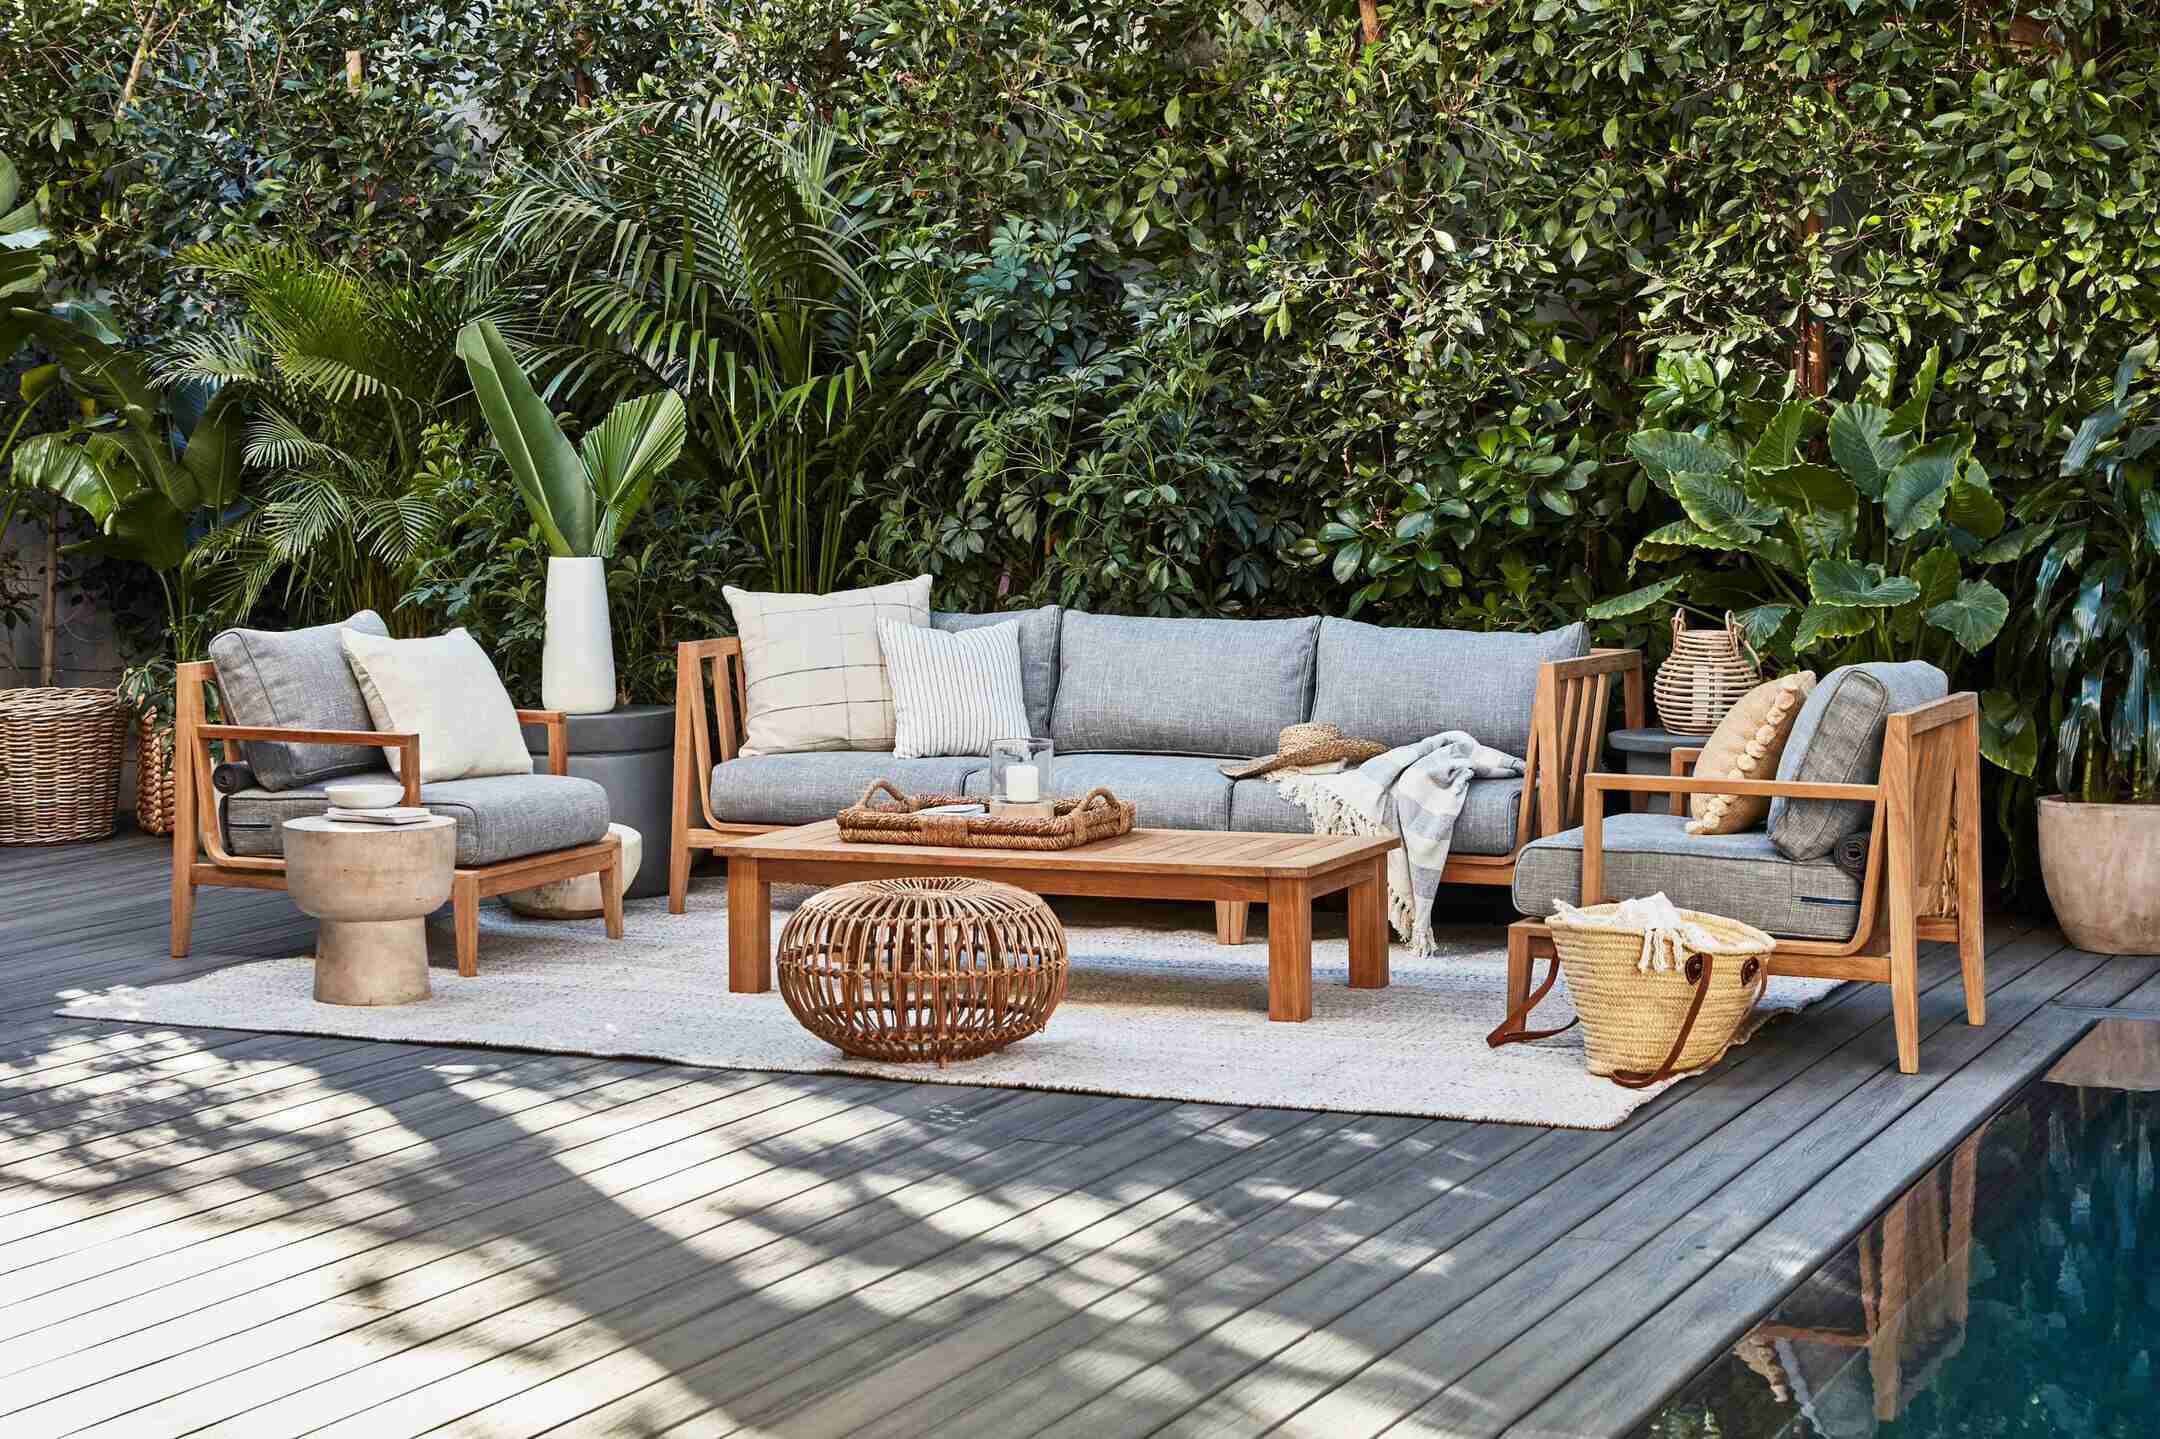 Who Has The Best Outdoor Furniture